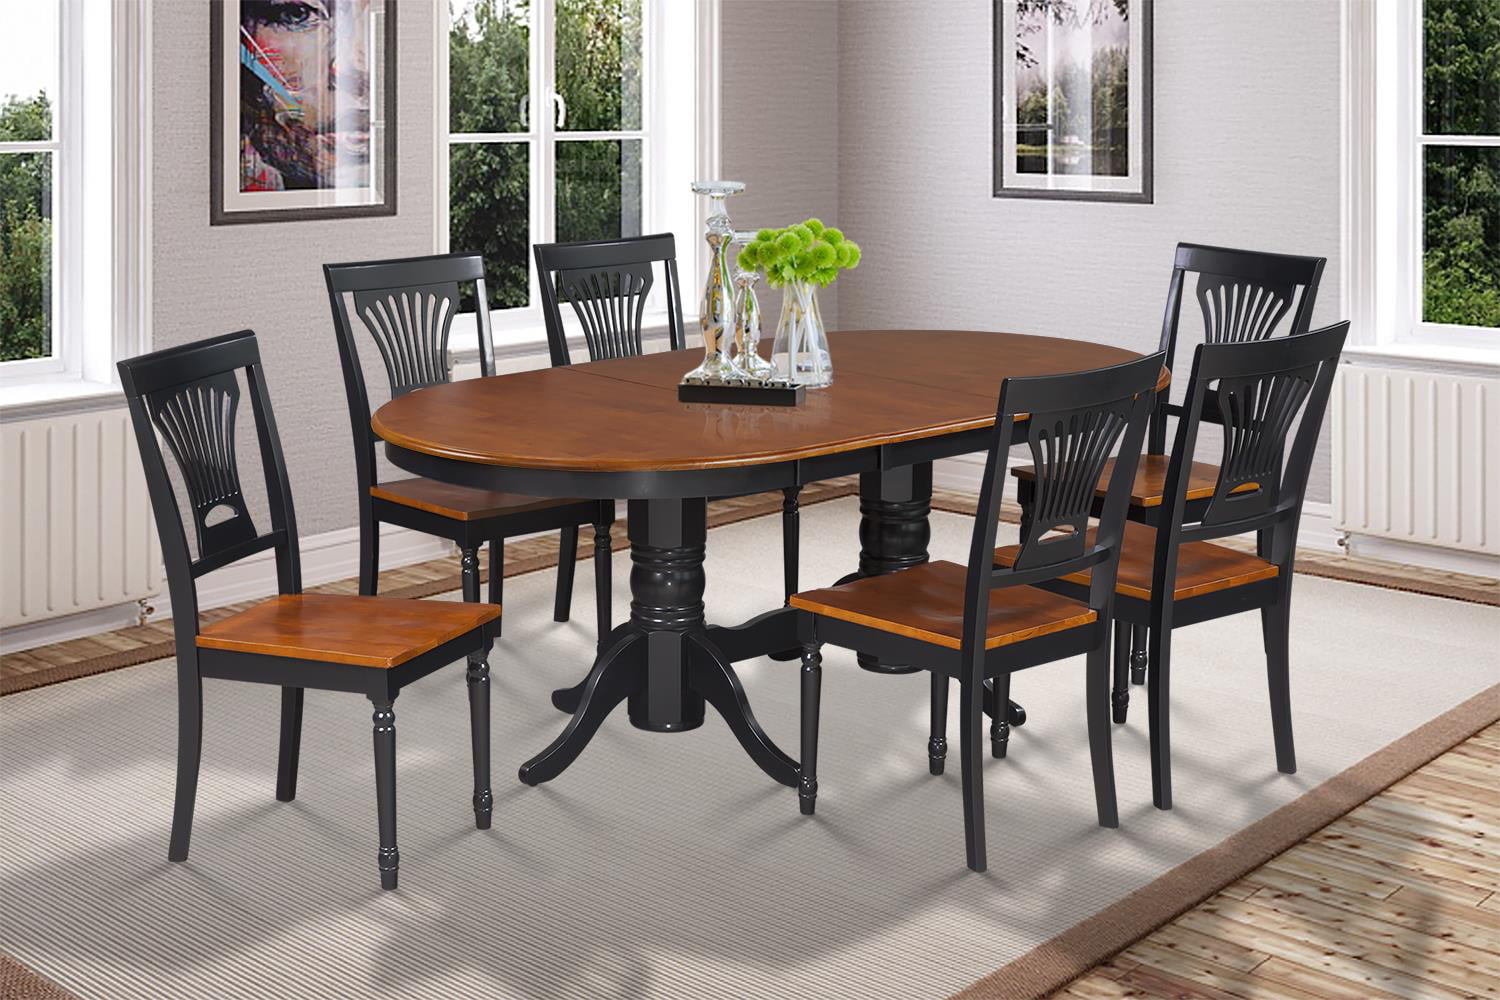 7 Piece Dining Room Set Table With A Butterfly Leaf And 6 Dining Chairs